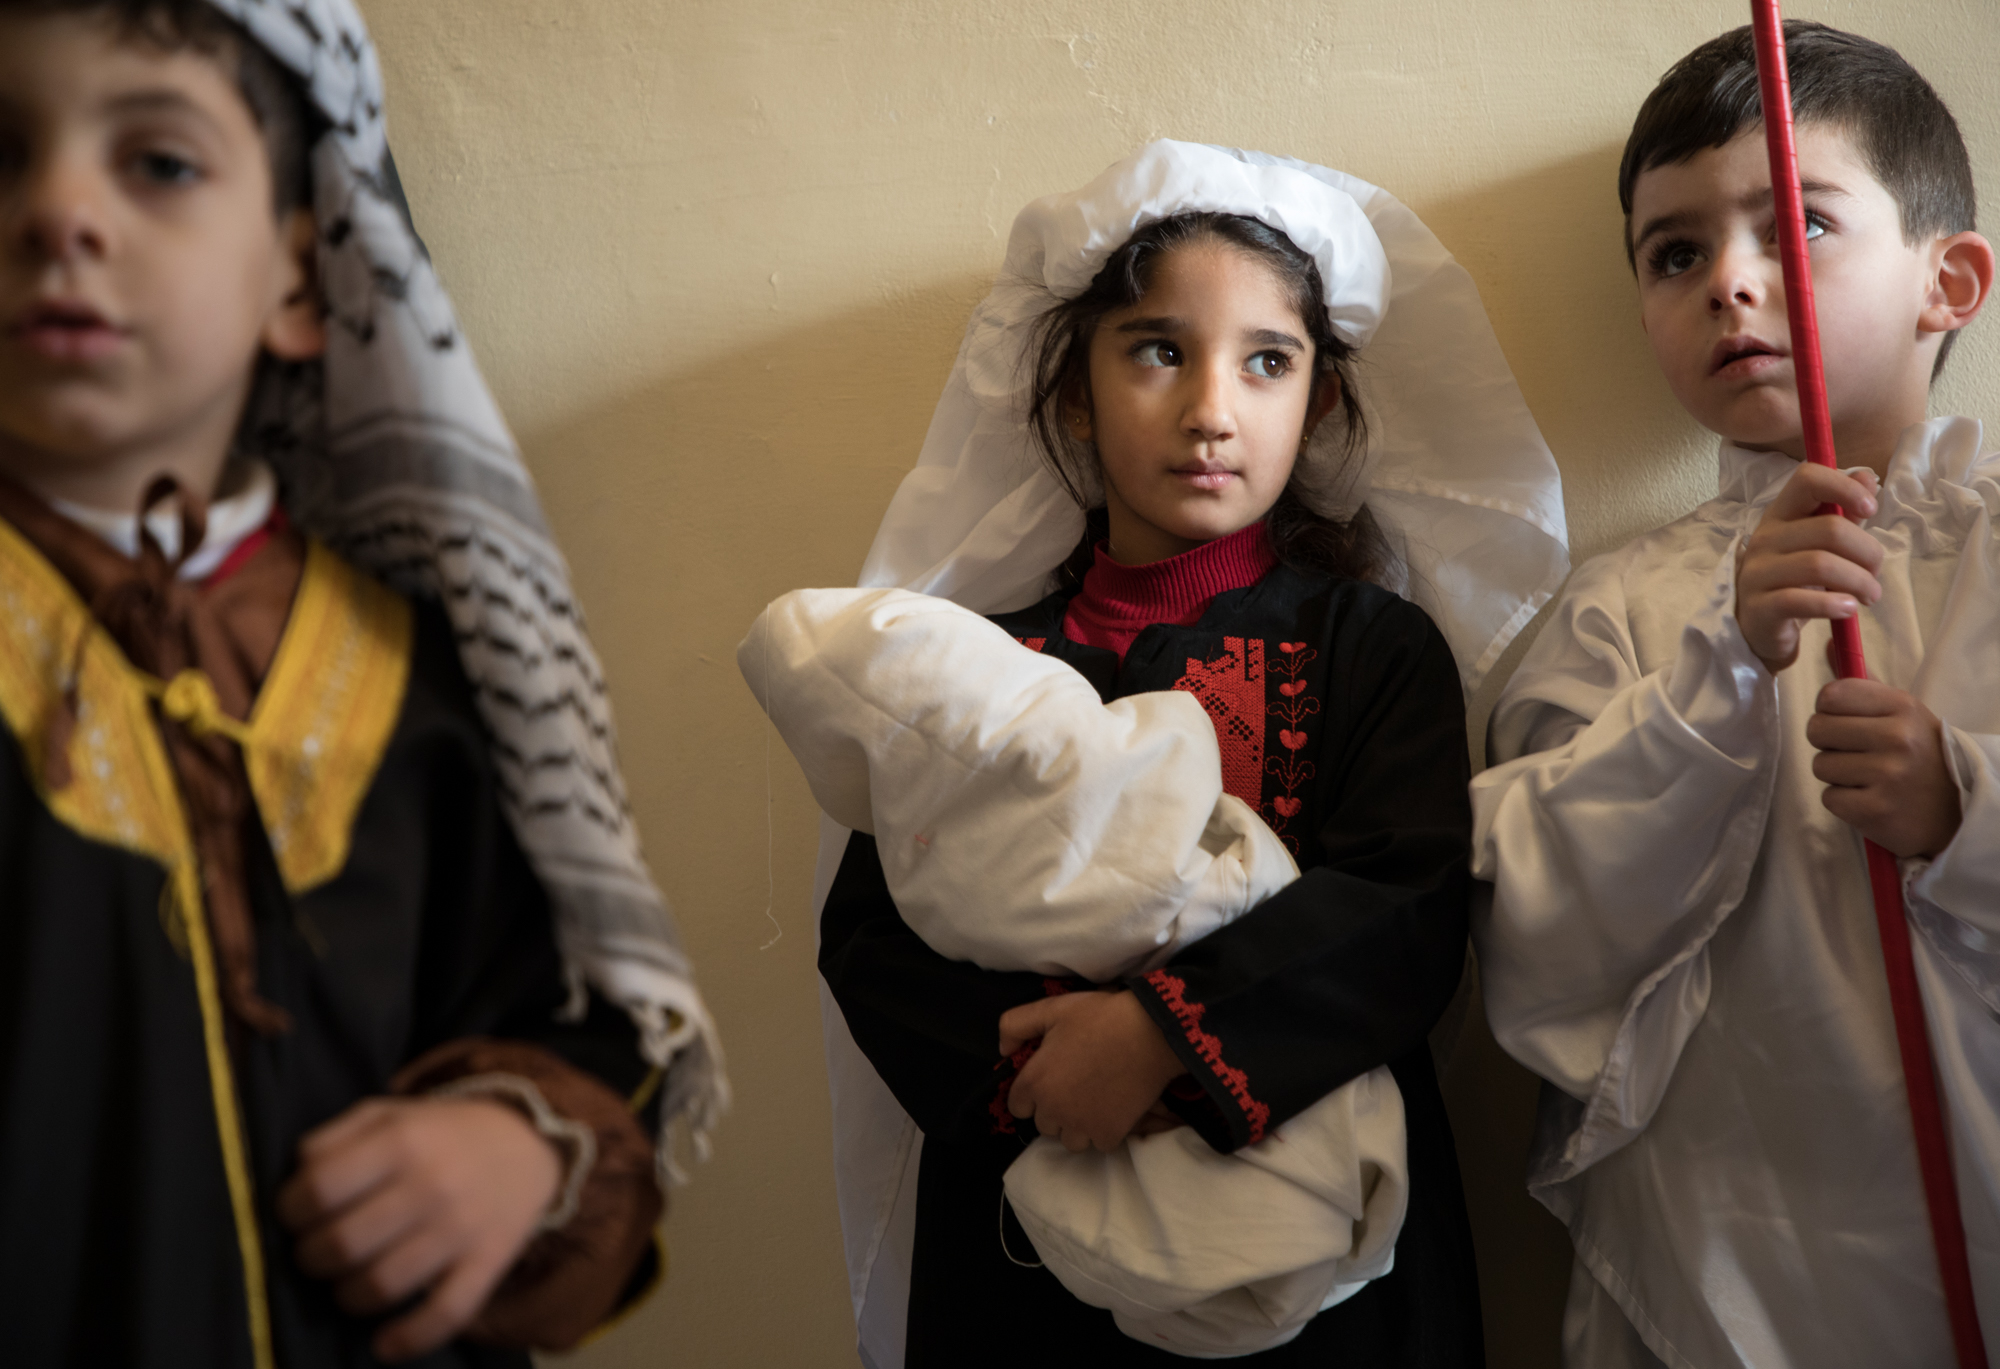 Palestinian children wait for their part in the Christmas pageant at the Lutheran school in Beit Jala.